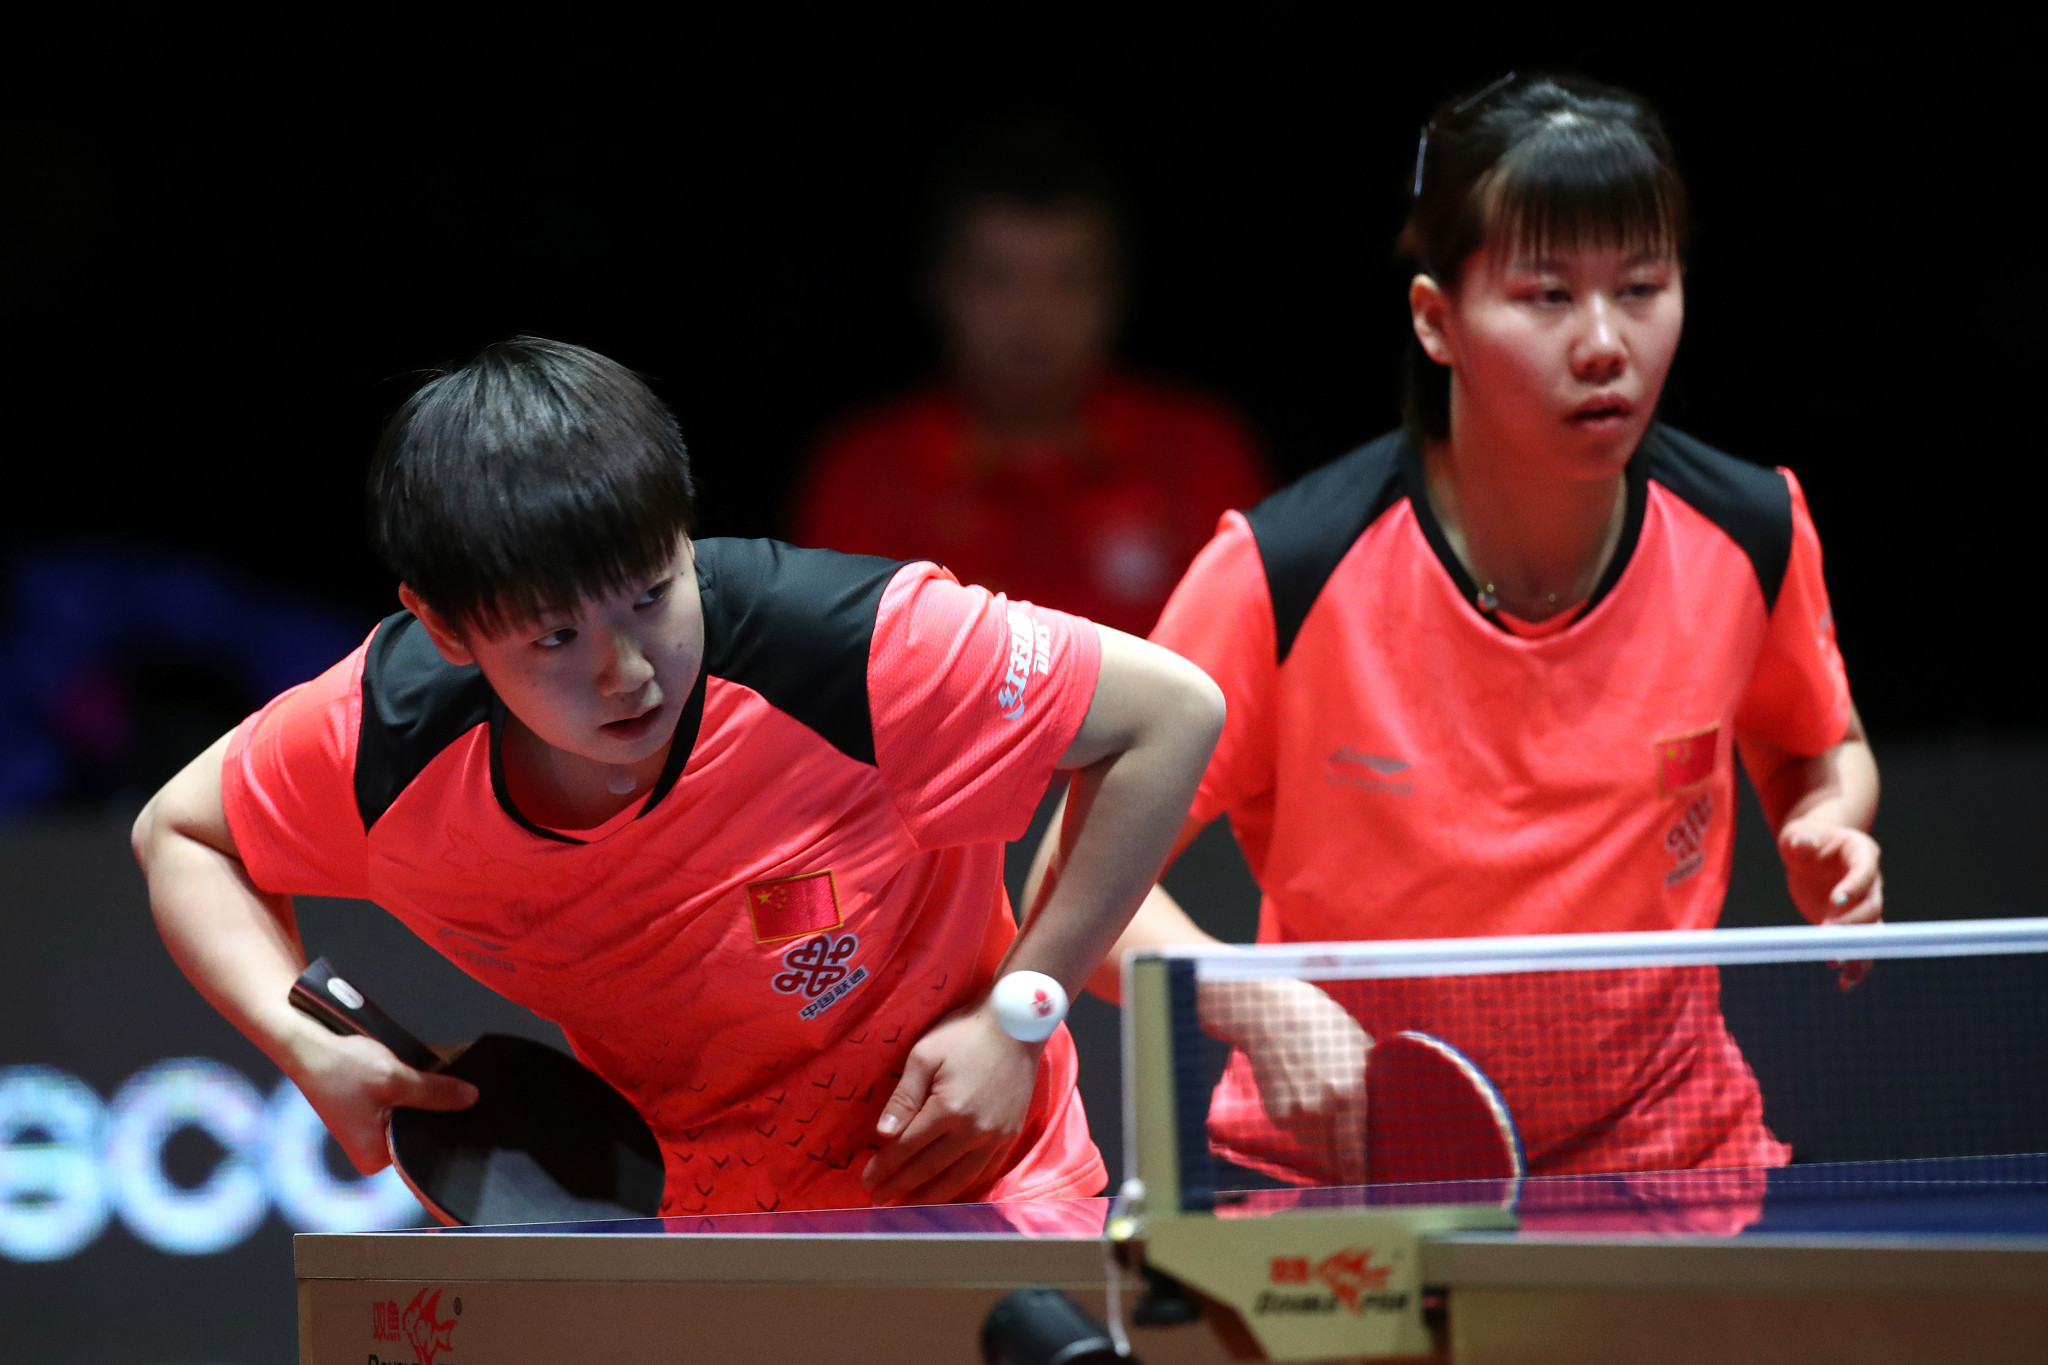 The ITTF Executive Committee met during the World Tour Grand Finals in Incheon ©ITTF